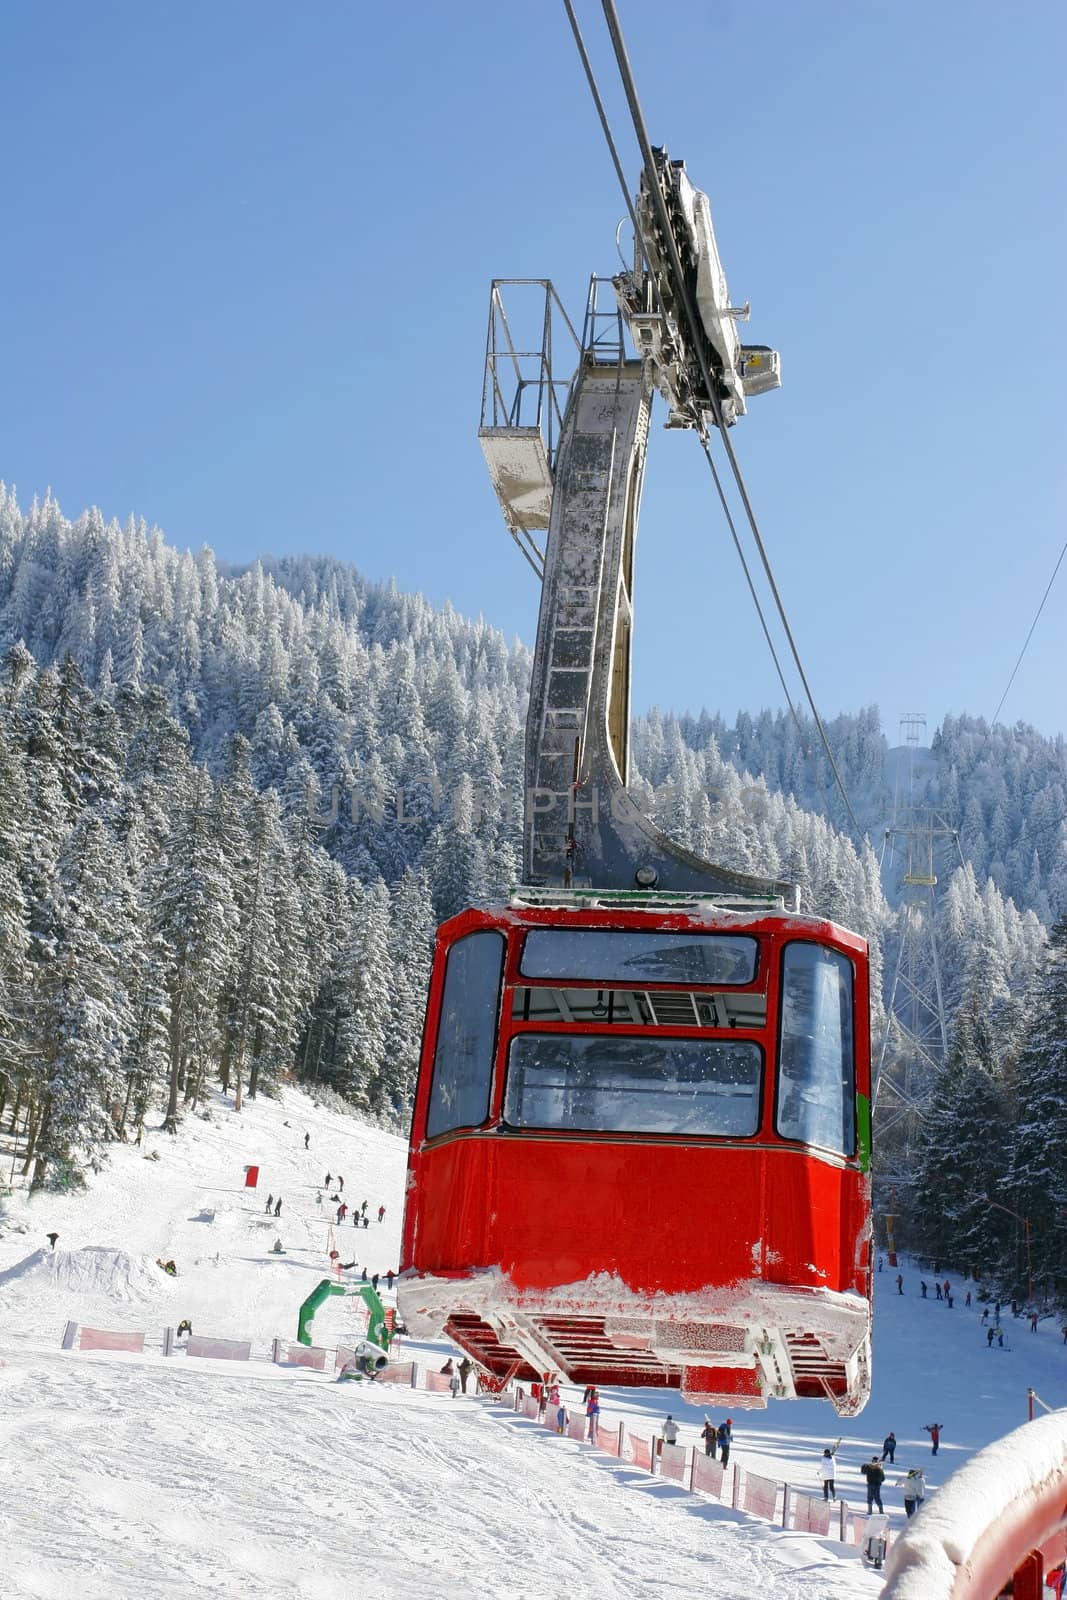 Winter landscape with a red cable car.